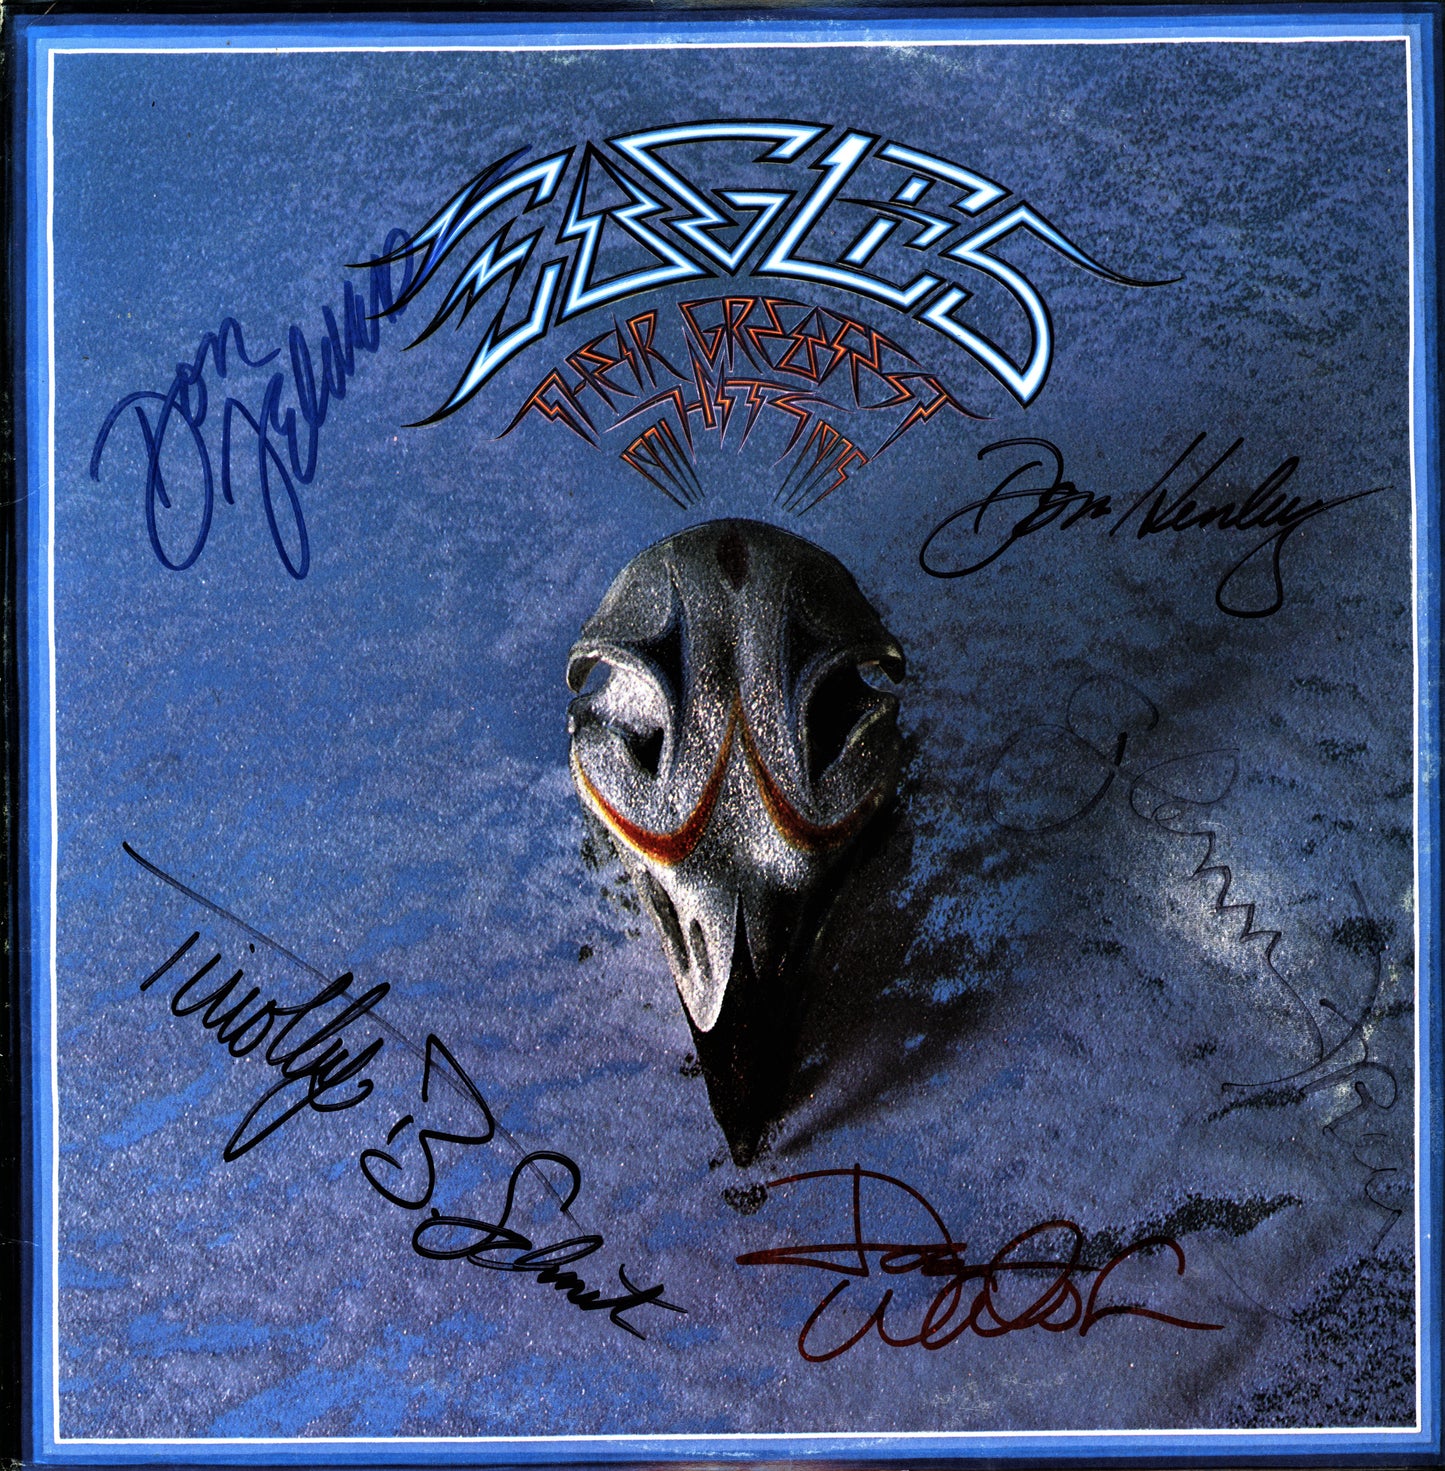 Eagles Autographed Lp "Their Greatest Hits" - Zion Graphic Collectibles